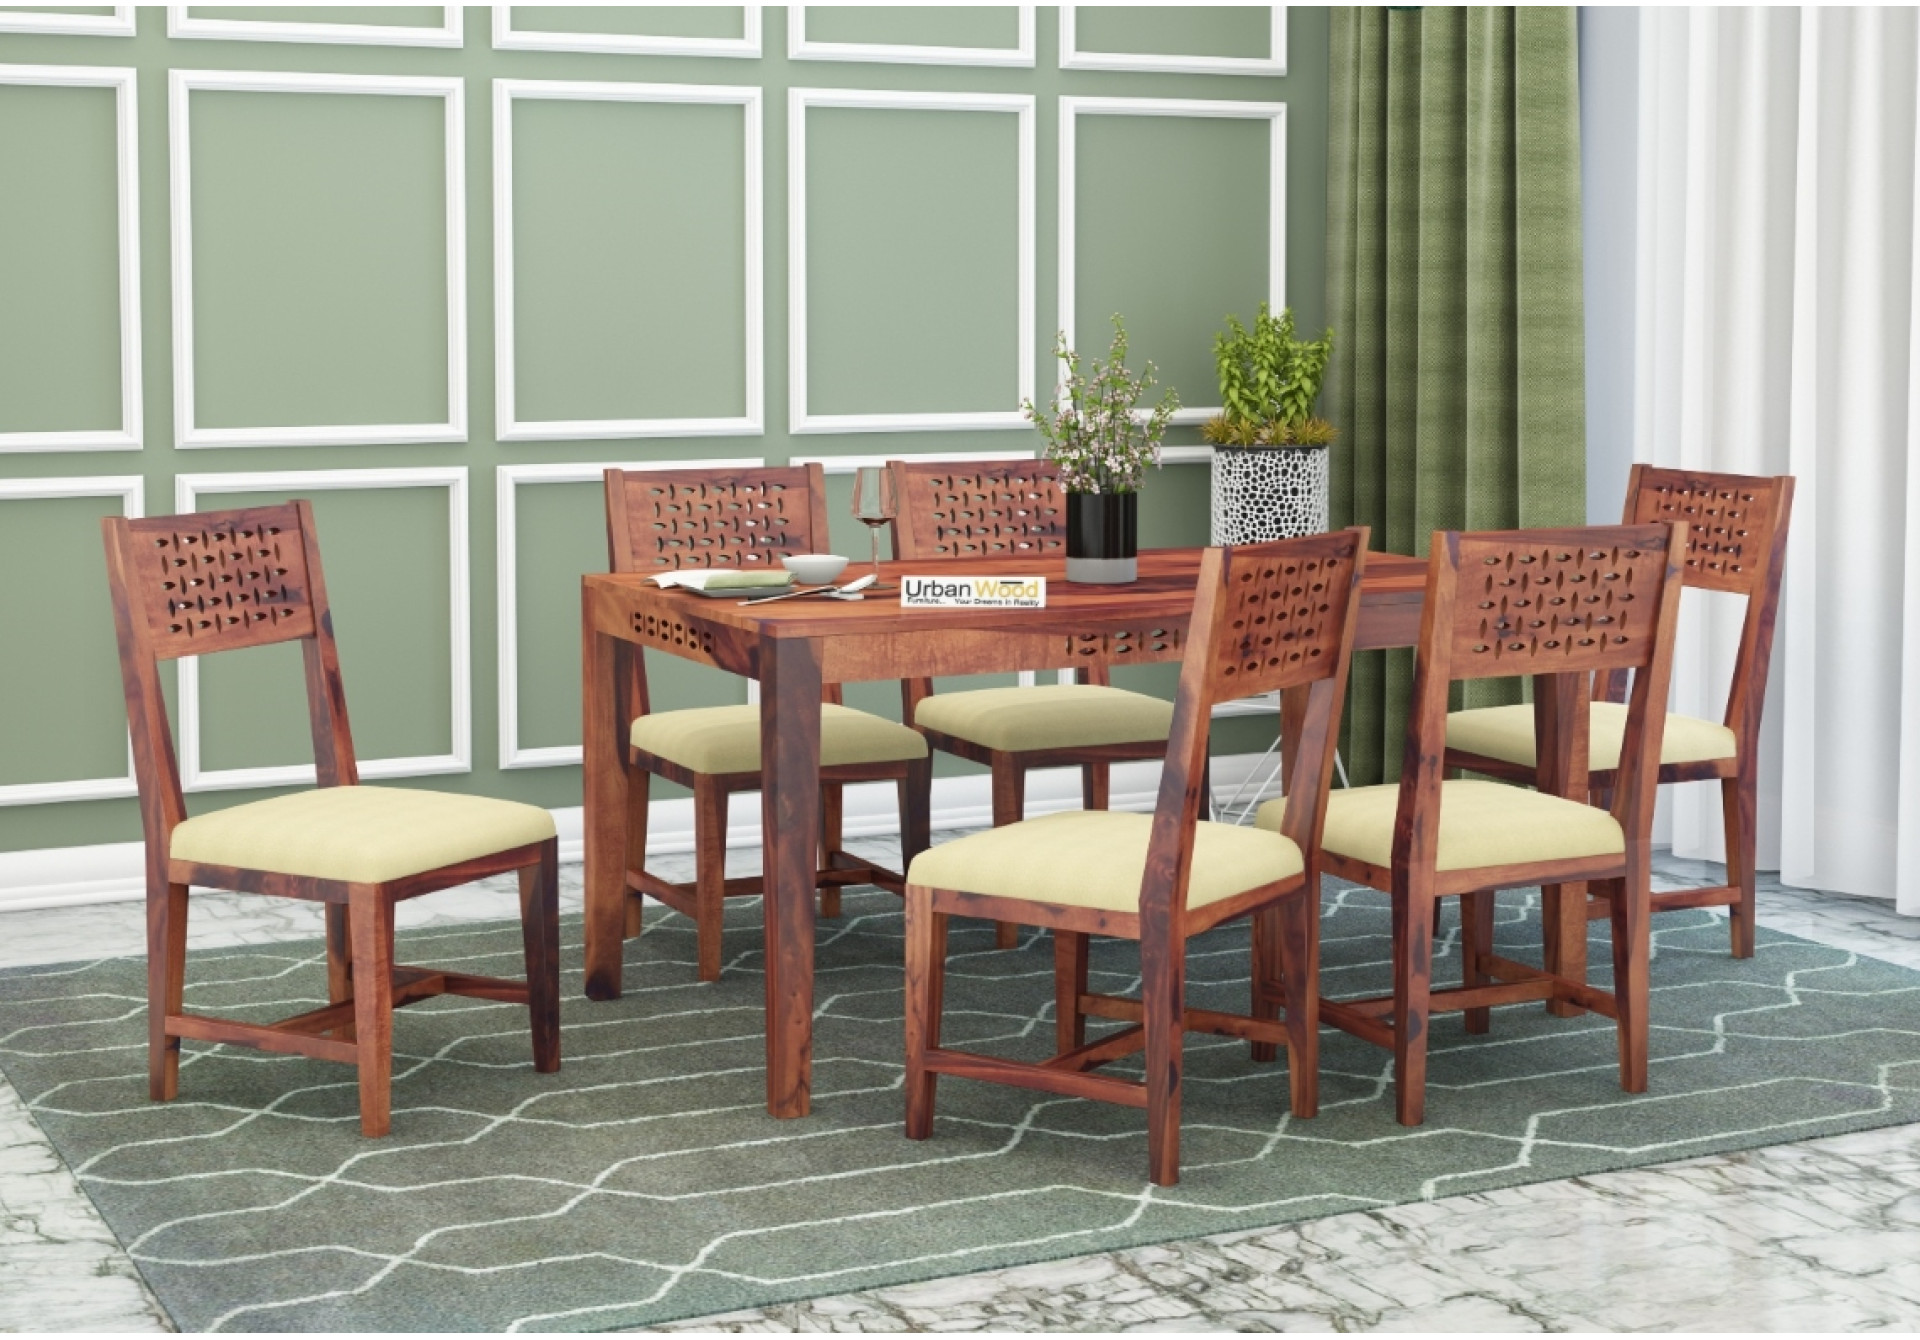 Woodora 6 Seater Dining Set with Cushion 